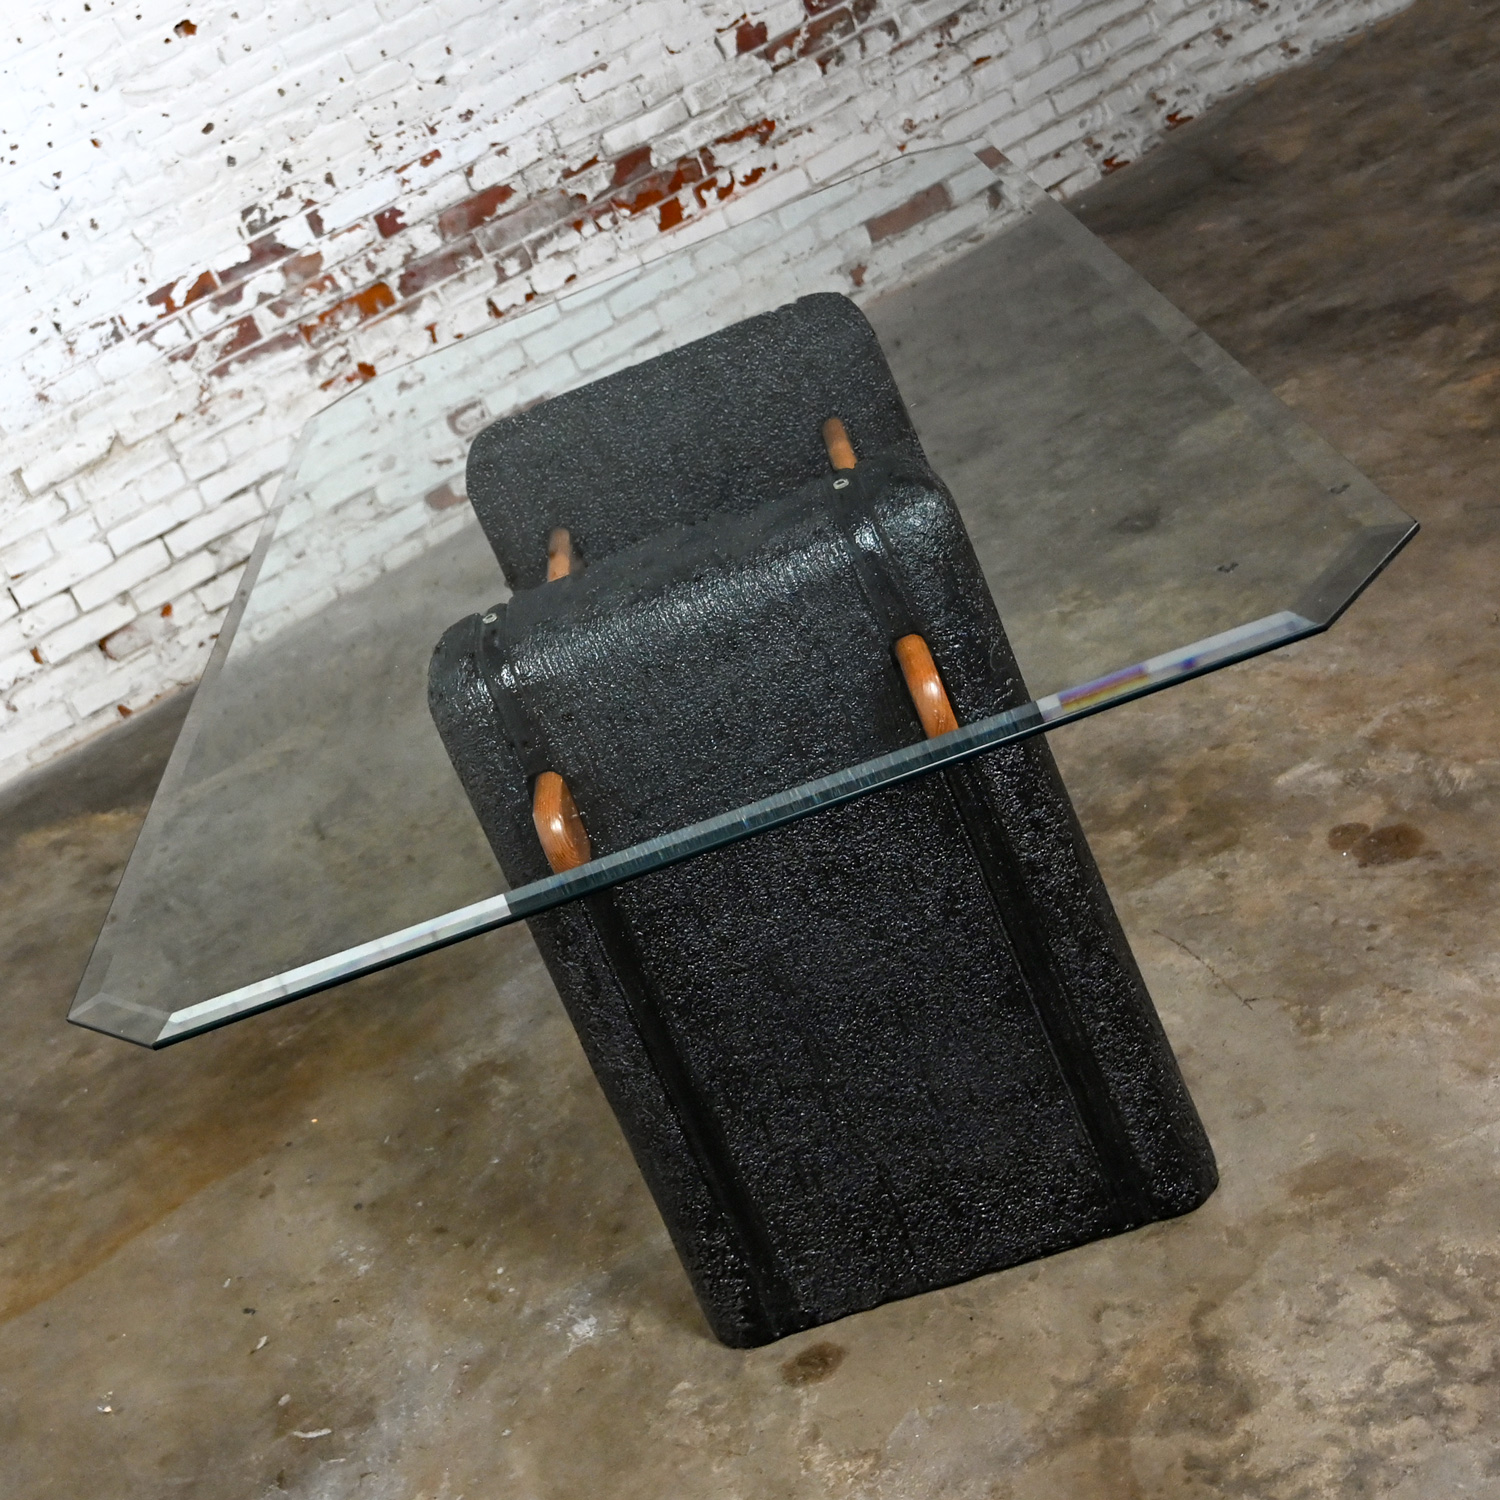 1980’s Postmodern Architectural Dining Table Black Molded Plaster Double Pedestal Base Crossbars & Glass Top